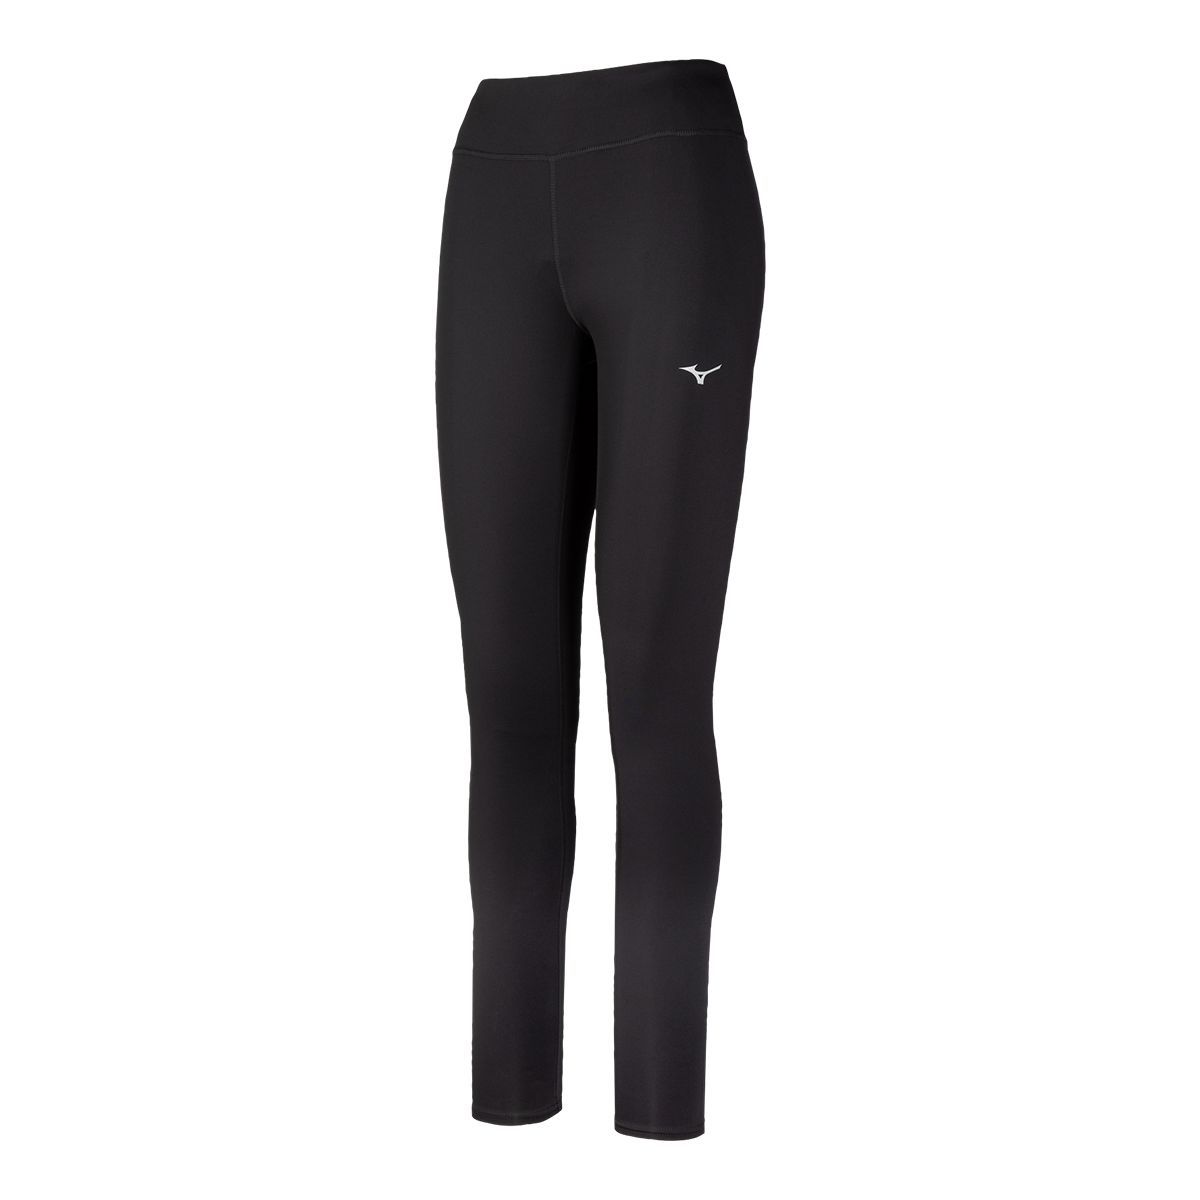 $50 - $100 Full Length Volleyball Pants & Tights.